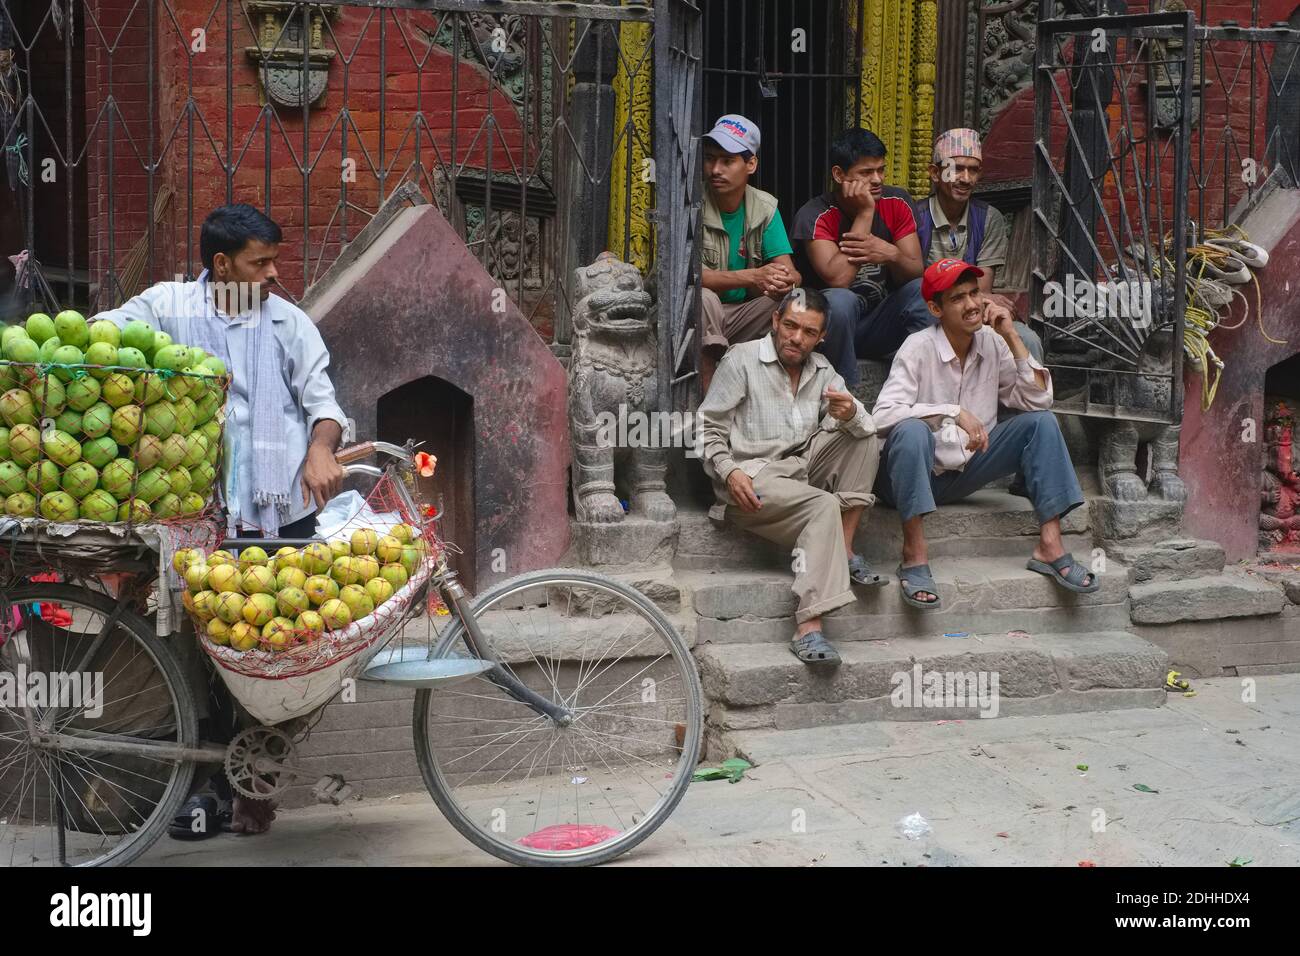 A mobile fruit vendor with his bicycle, in front of a small temple, with a bunch of men idly idling on its steps - a street scene in Kathmandu, Nepal Stock Photo